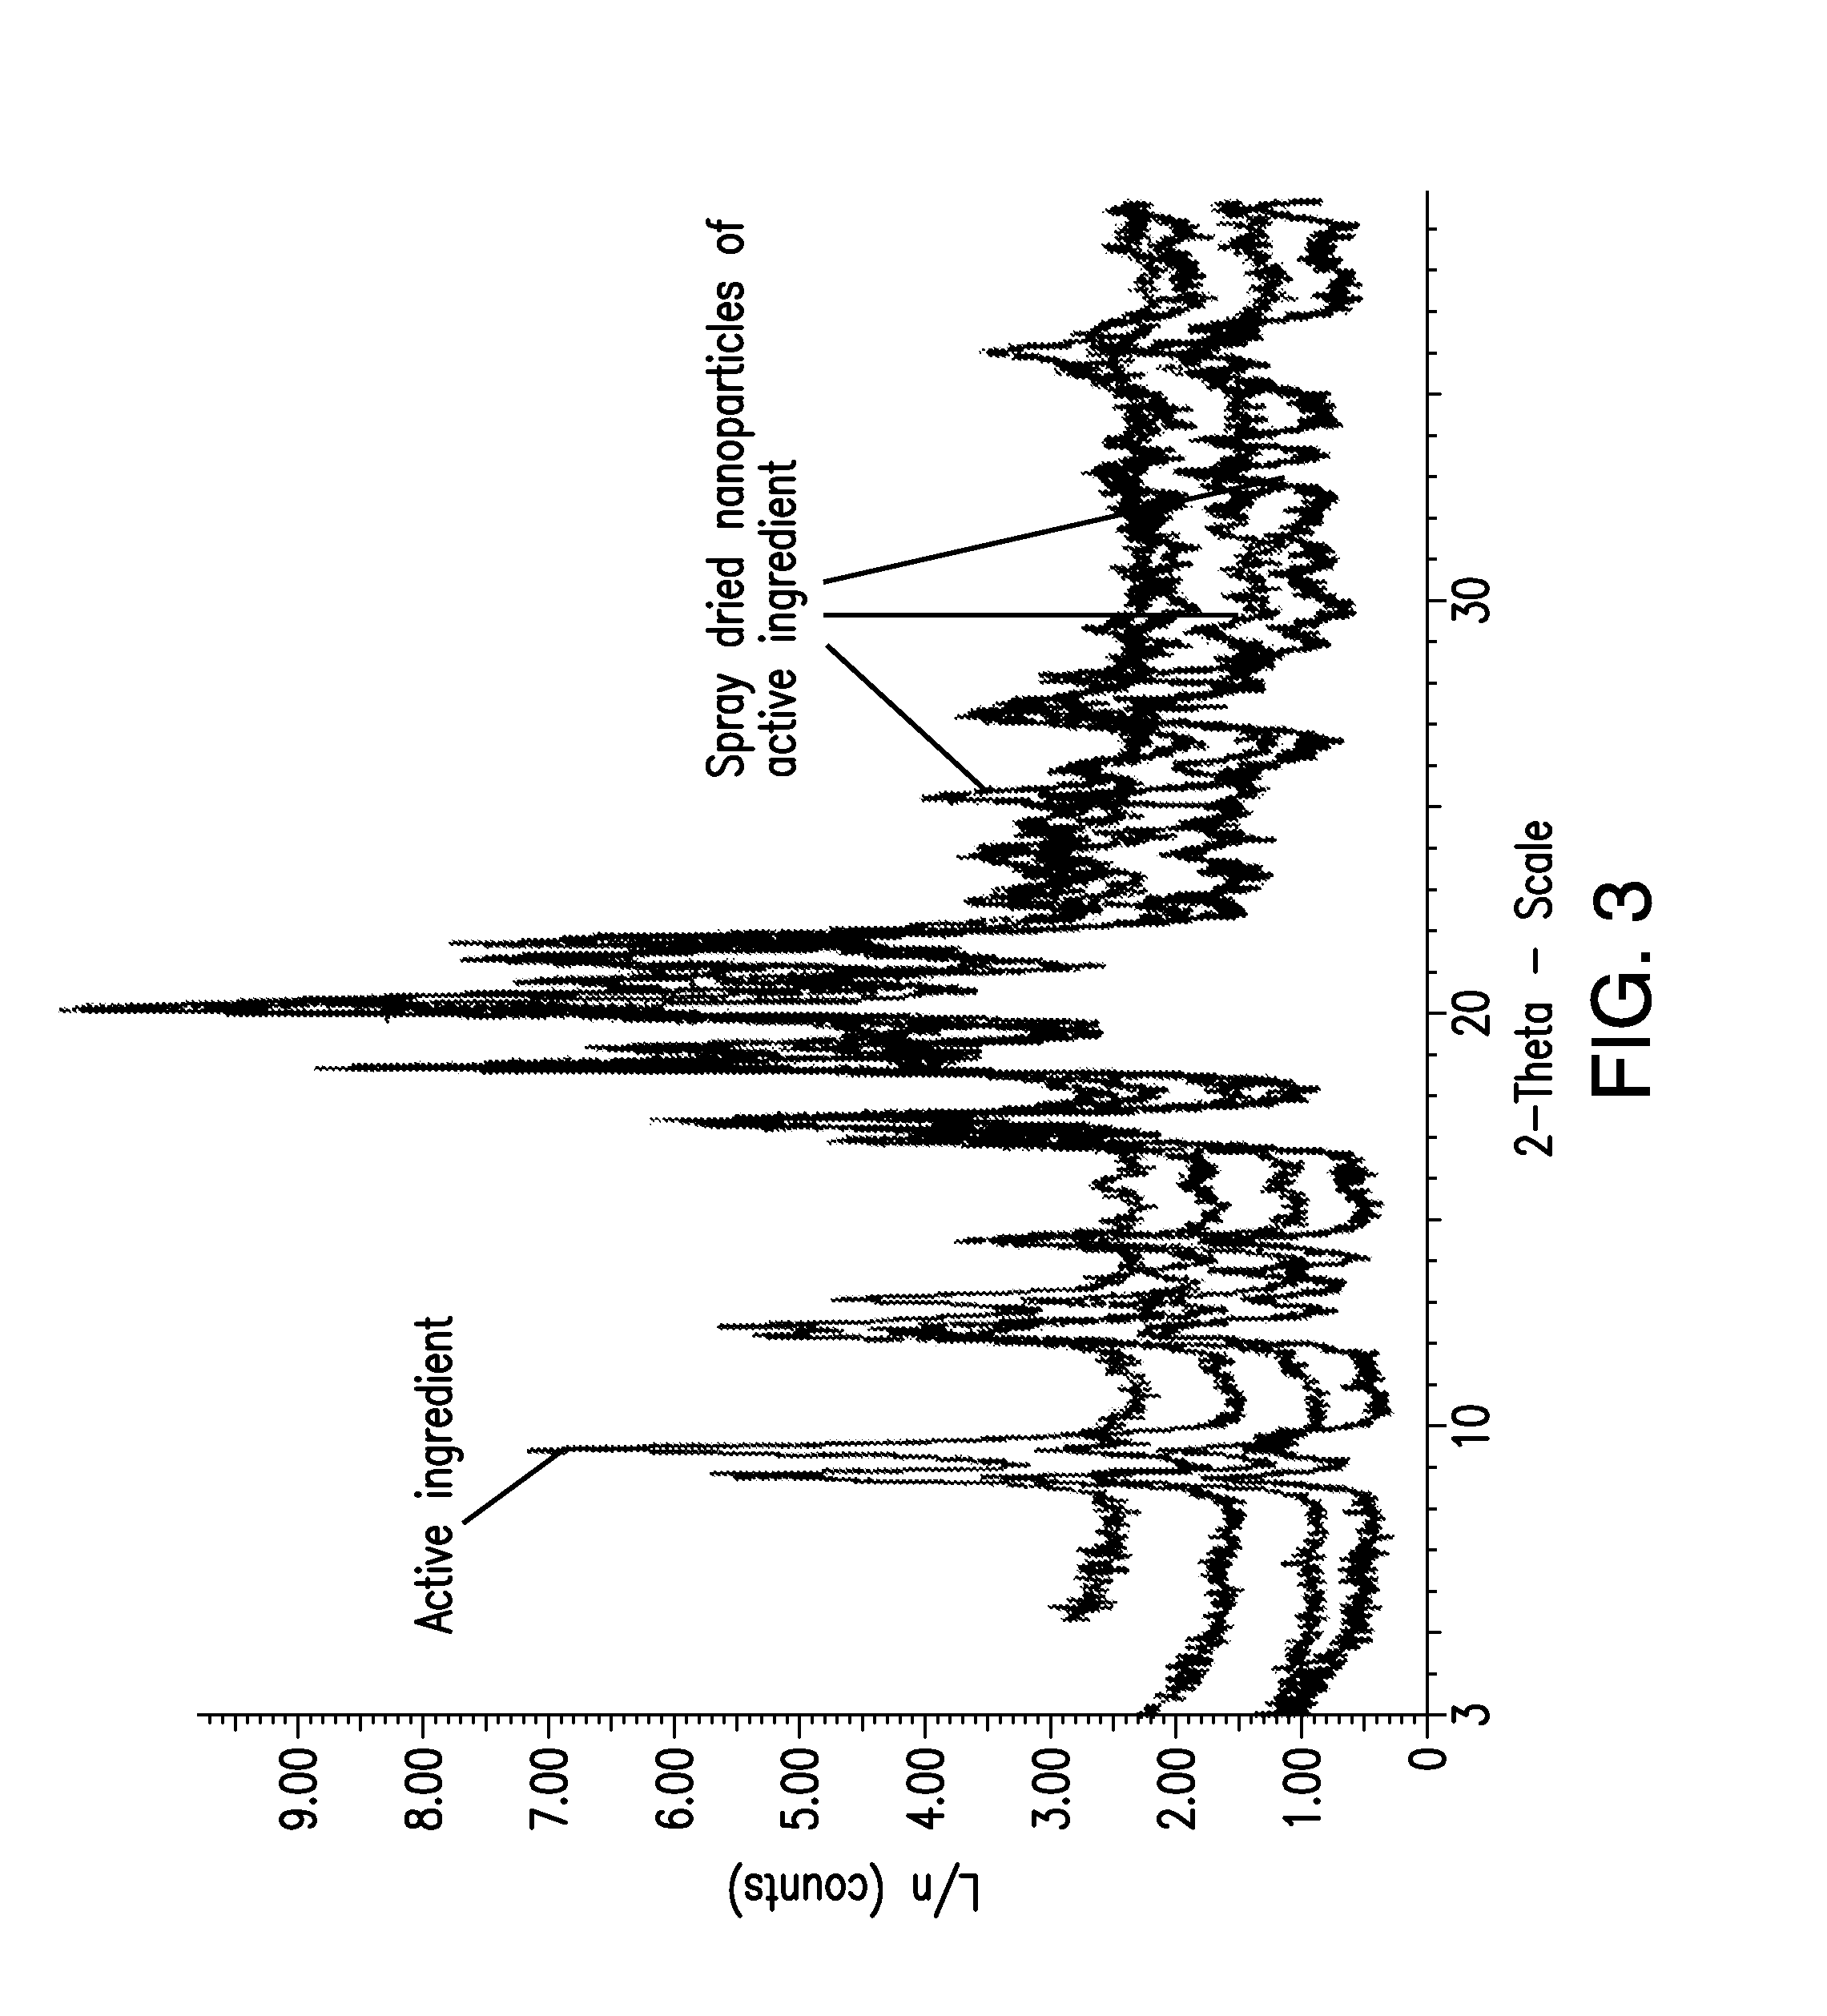 Stable glucokinase activator compositions